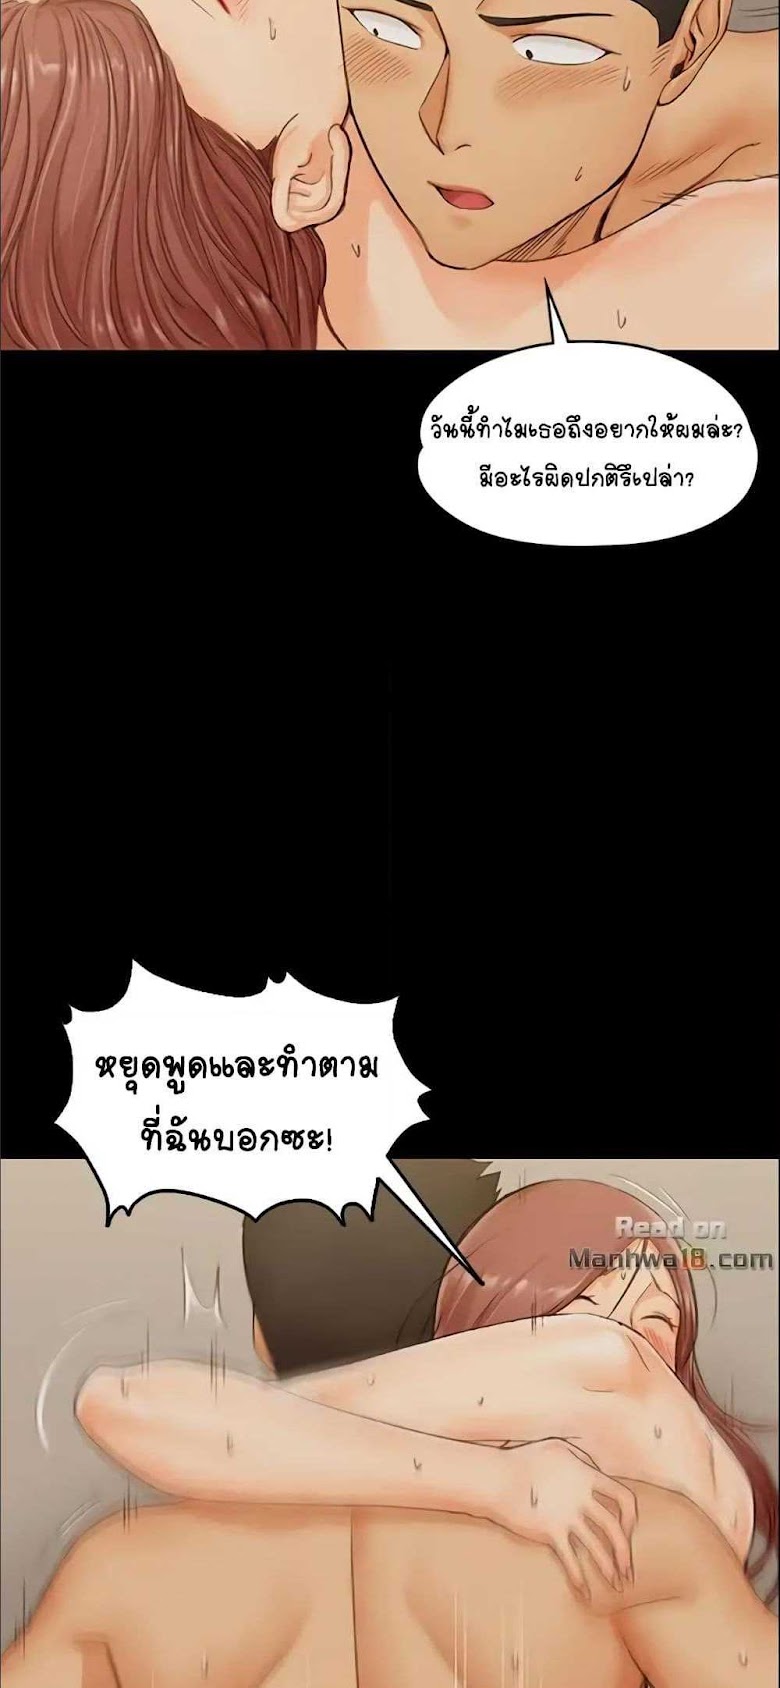 His Place - หน้า 34